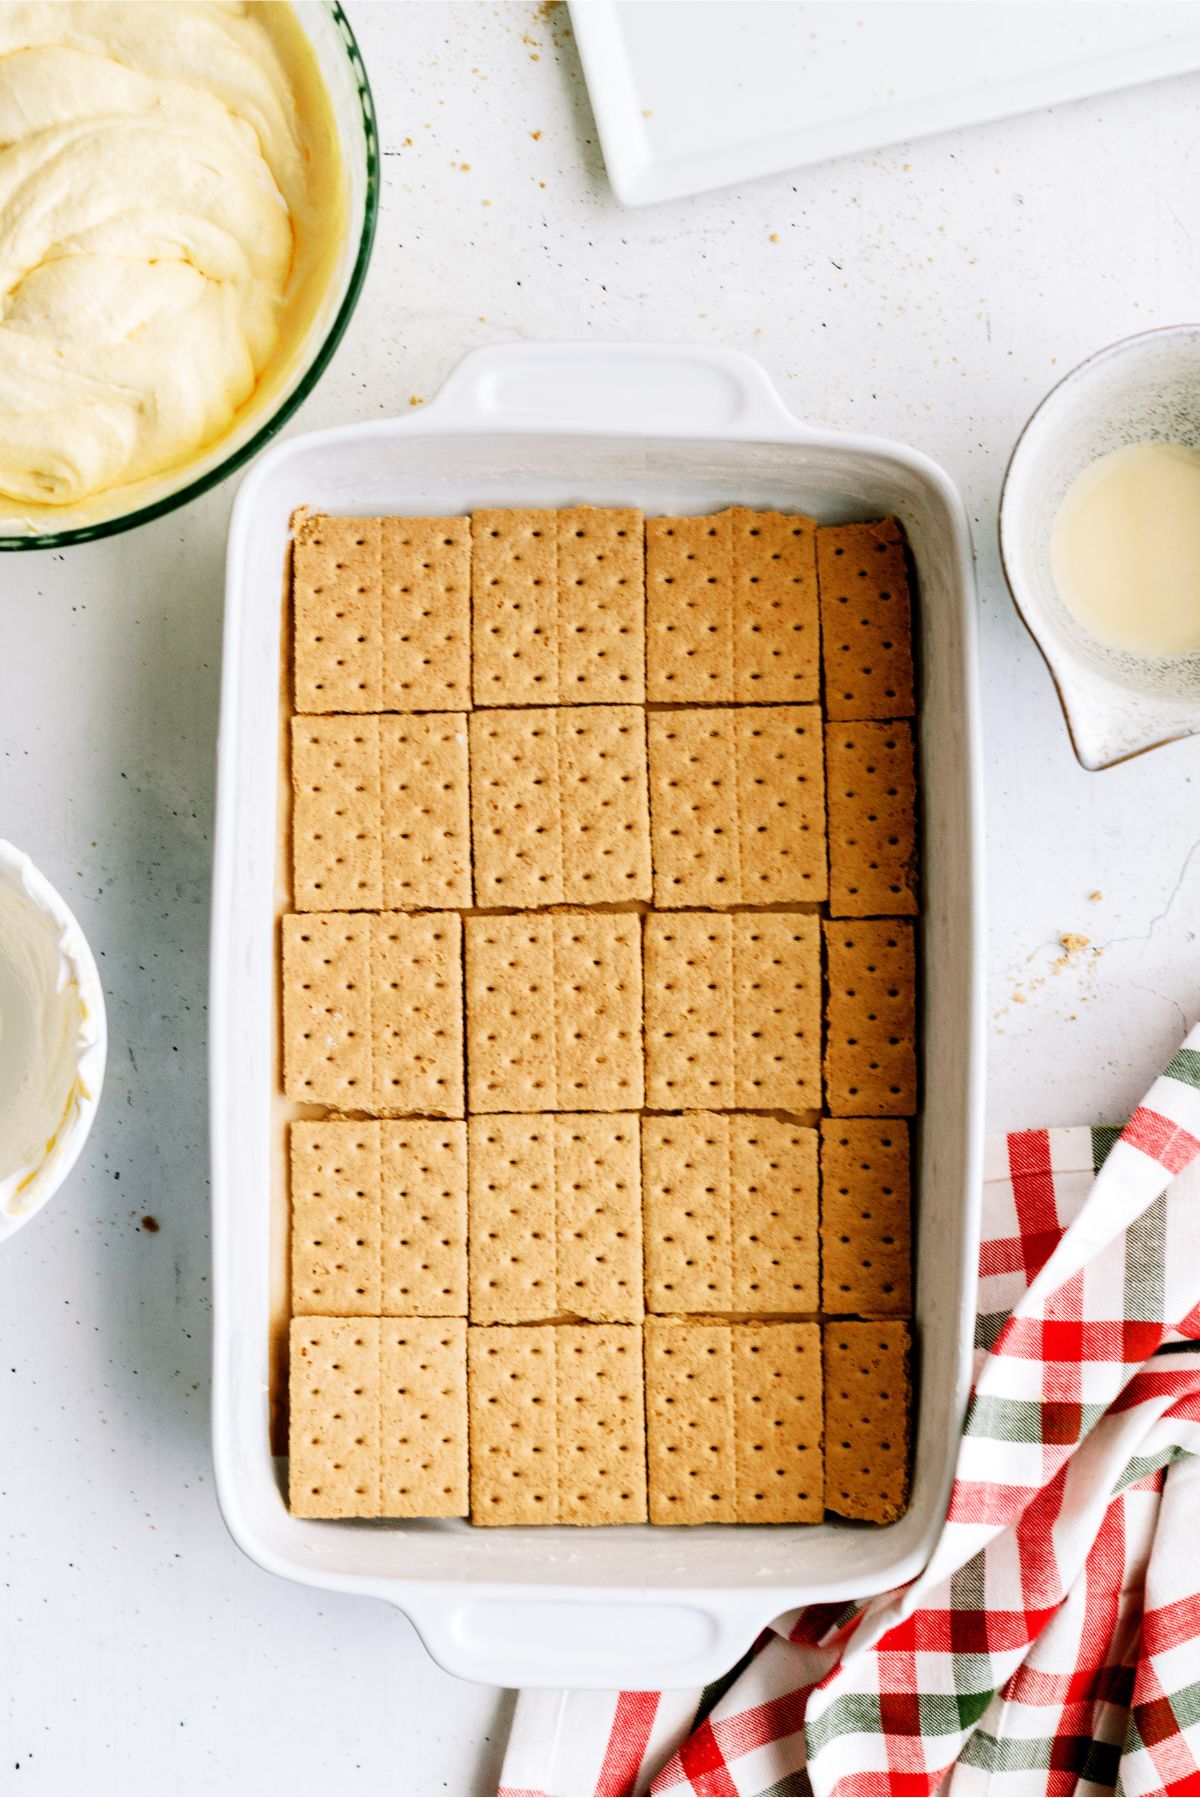 Baking dish with graham crackers layered on the bottom